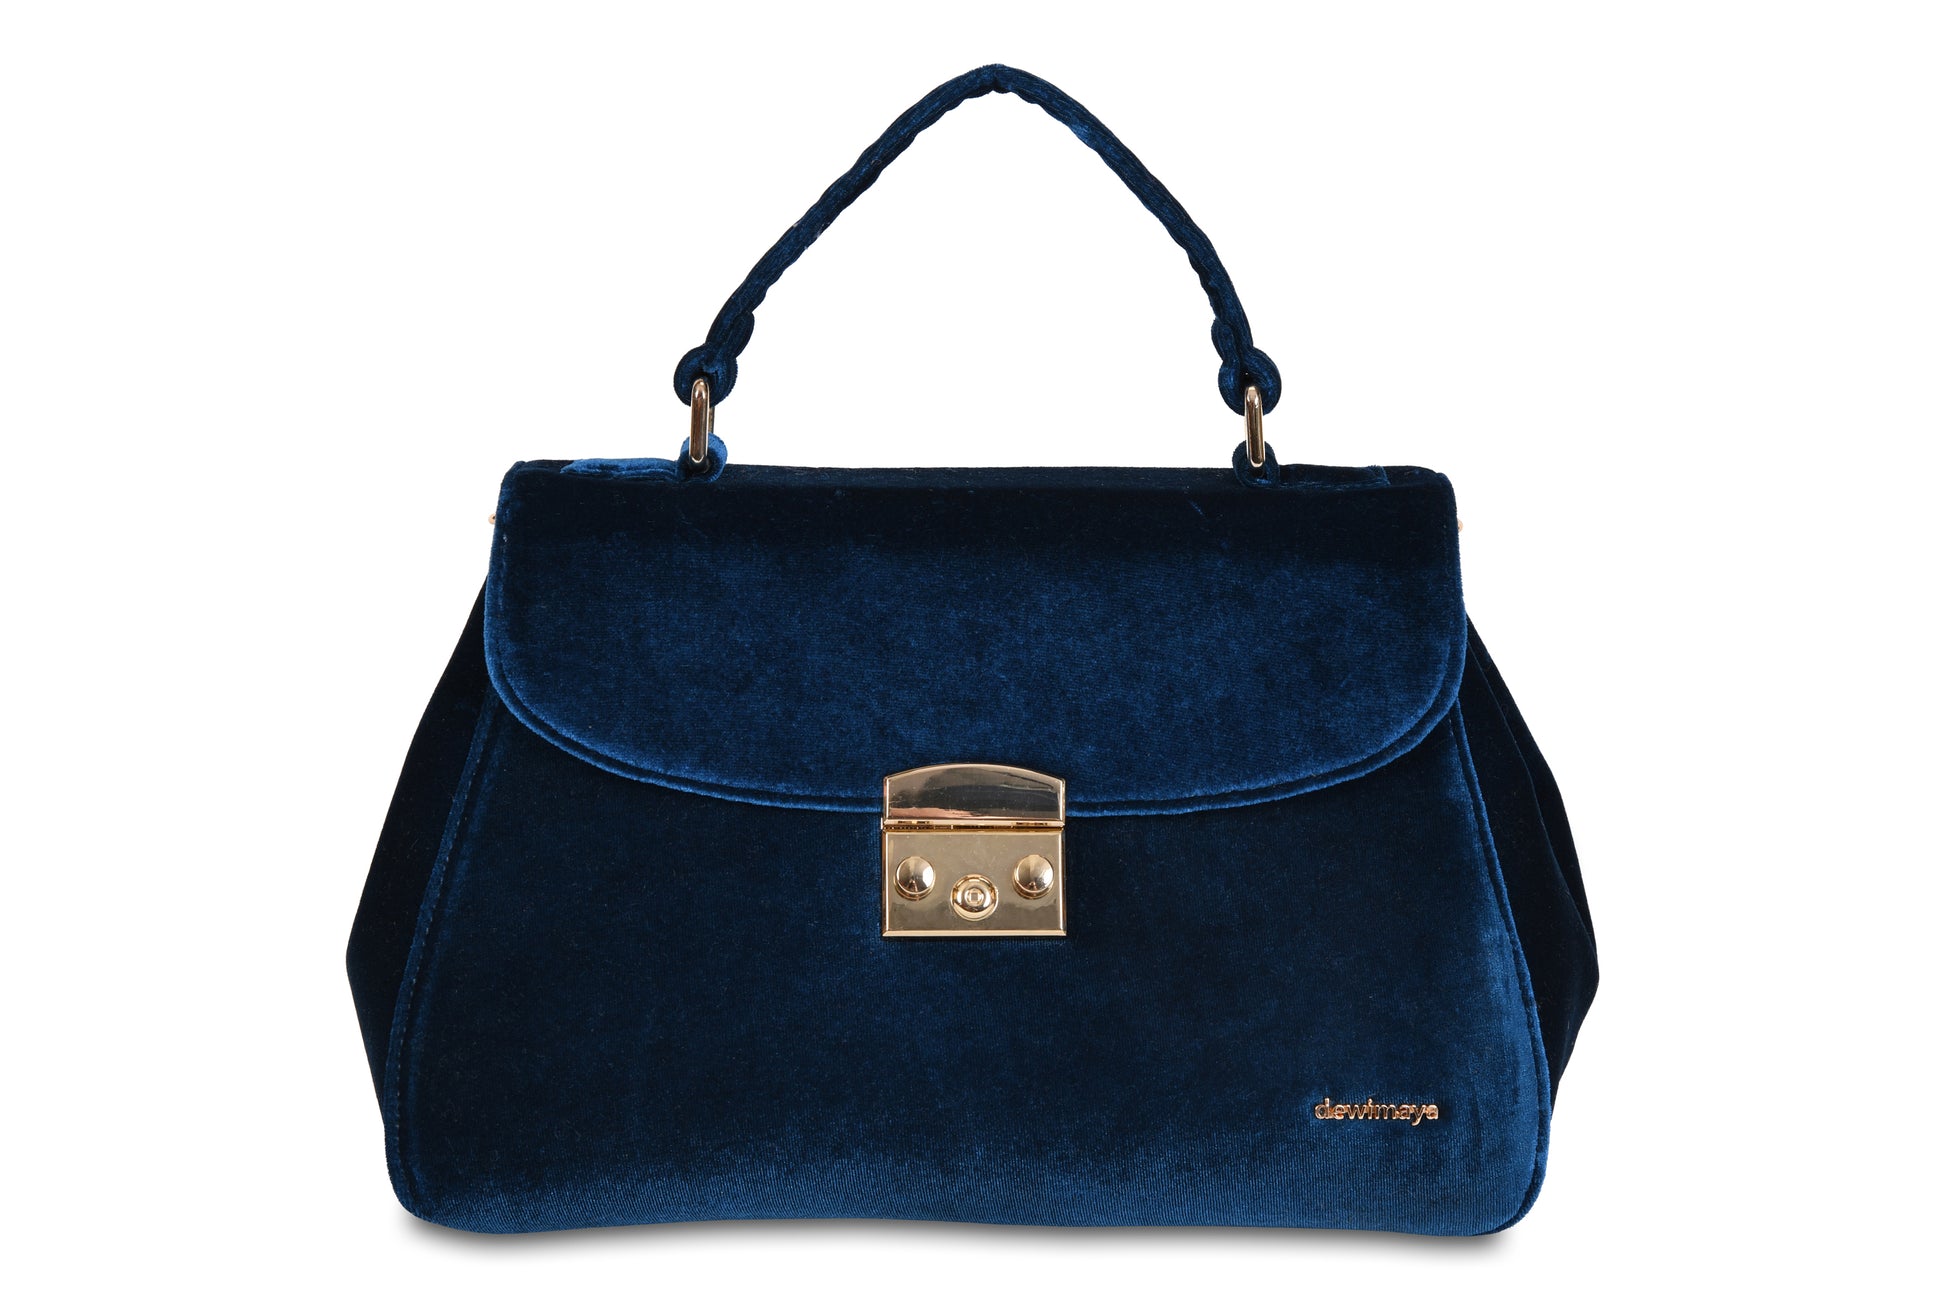 Charlotte Dark Blue Velvet Handbag made by Dewi Maya front view available at the best boutique in Upstate South Carolina Spartanburg Greenville Dewi Maya Boutique